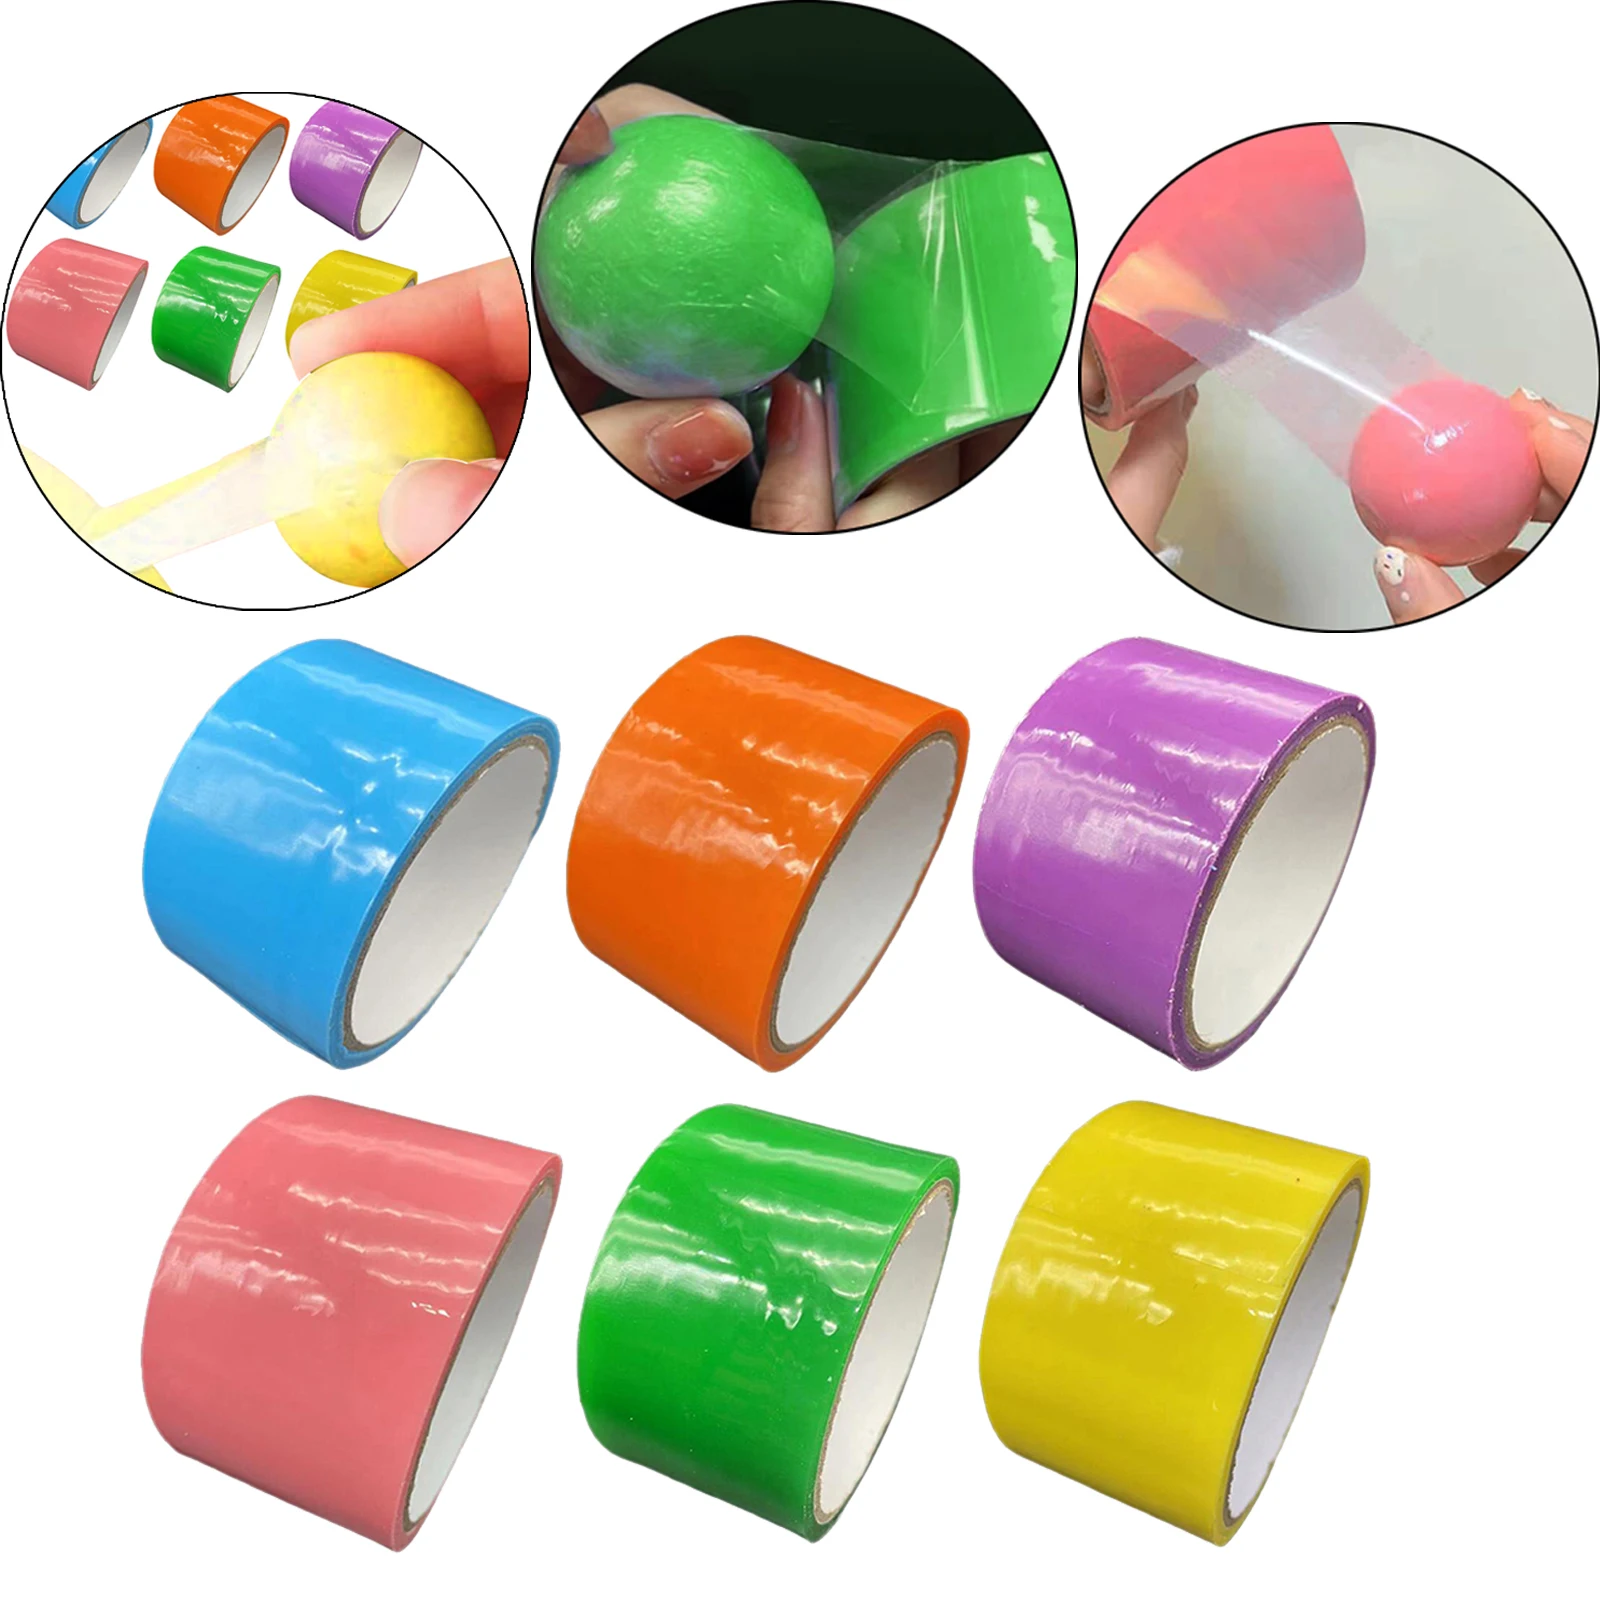 6 Roll Sticky Ball Tape Pearlescent Color Funny Rainbow Tape Crafts  Stationery Tapes Educational Sensory Toy for Student Home - AliExpress